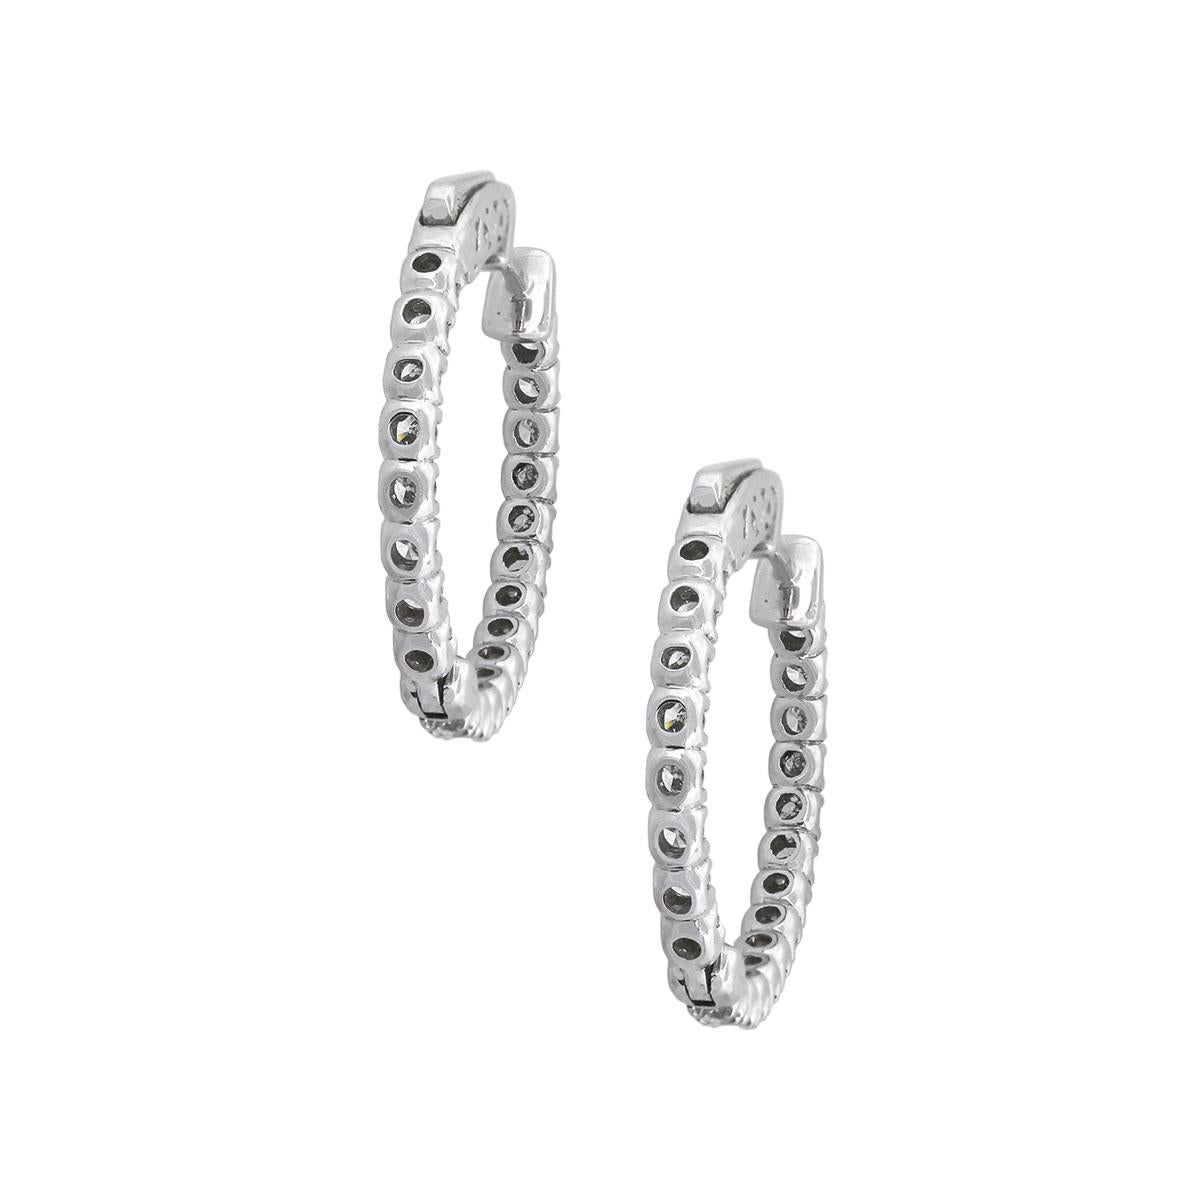 Material: 14k White Gold 1.60ctw
Diamond Details: Approximately 1.60ctw of round brilliant diamonds. Diamonds are G/H in color and SI in clarity
Measurements: 0.81″ x 0.11″ x 0.80″
Earrings Backs: Hinged Backs
Total Weight: 6.5g (4.2dwt)
SKU: